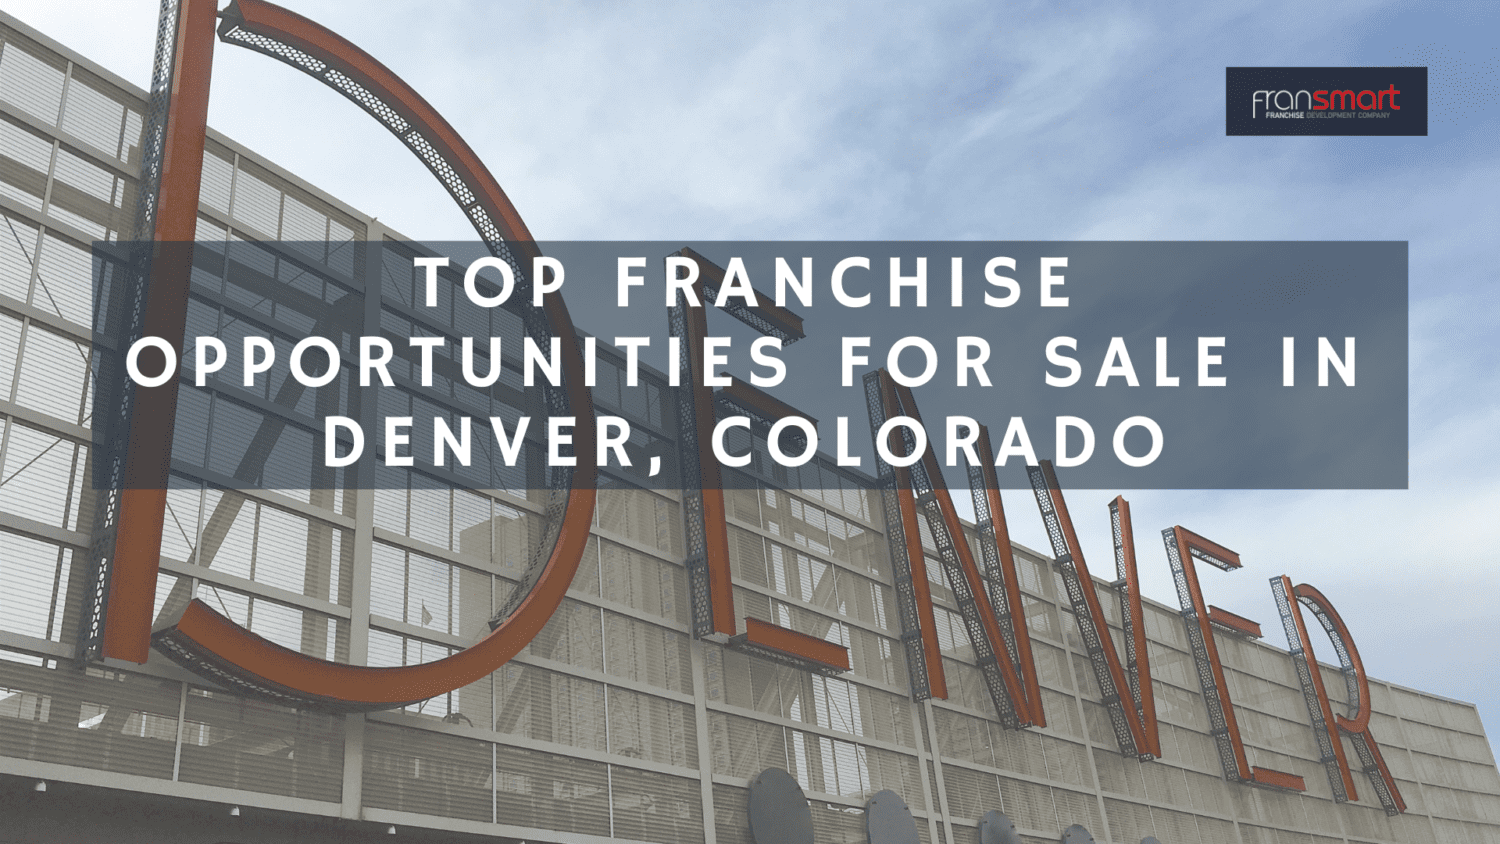 Top Franchise Opportunities for Sale in Denver, Colorado